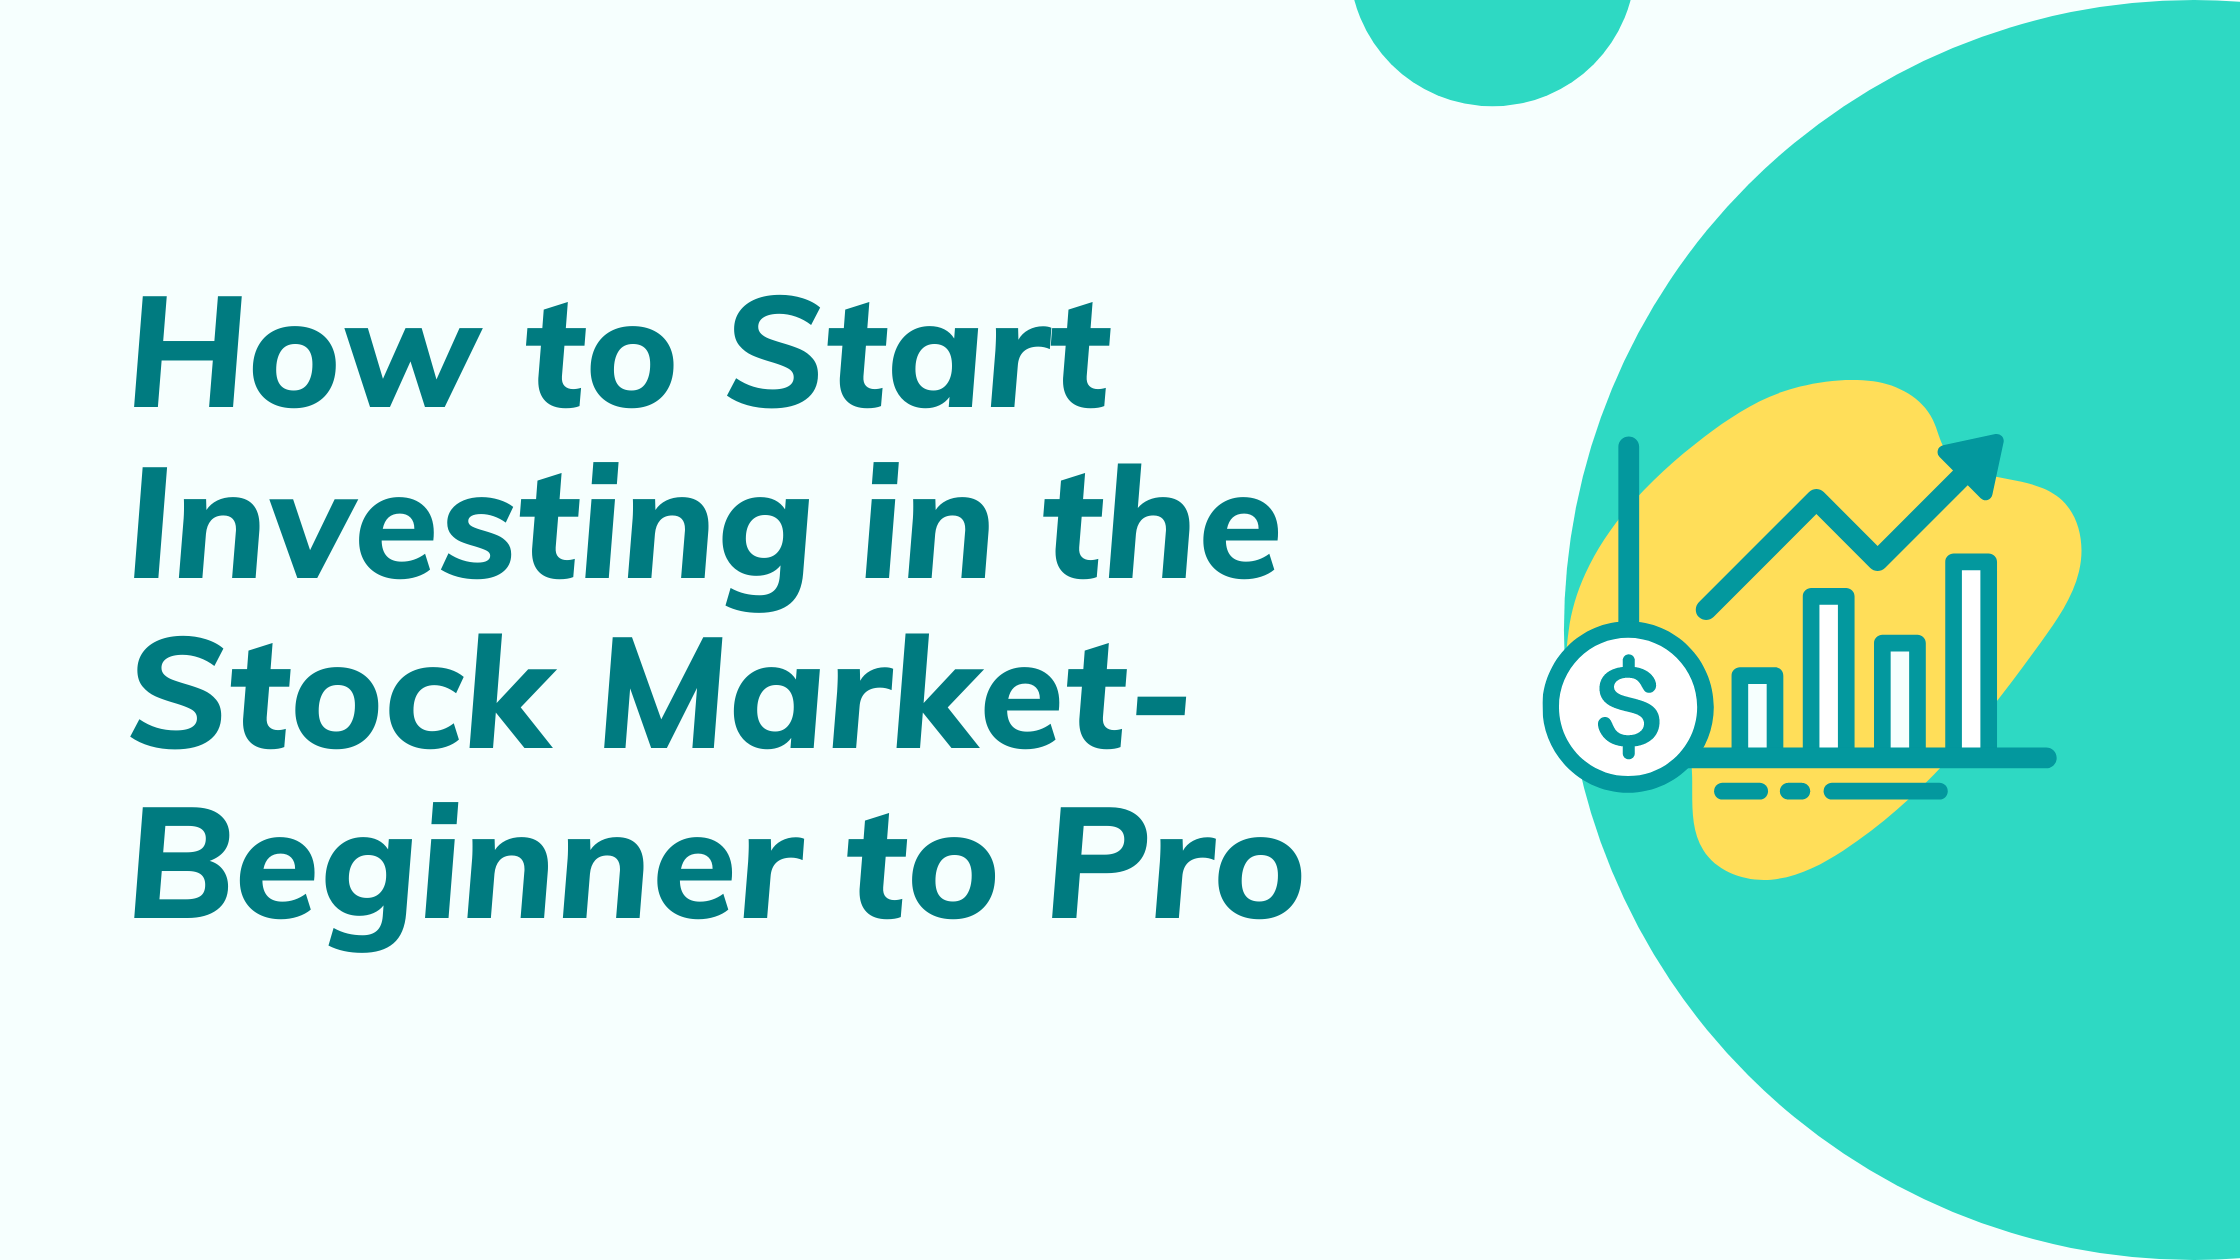 How To Start Investing In The Stock Market- Beginner To Pro